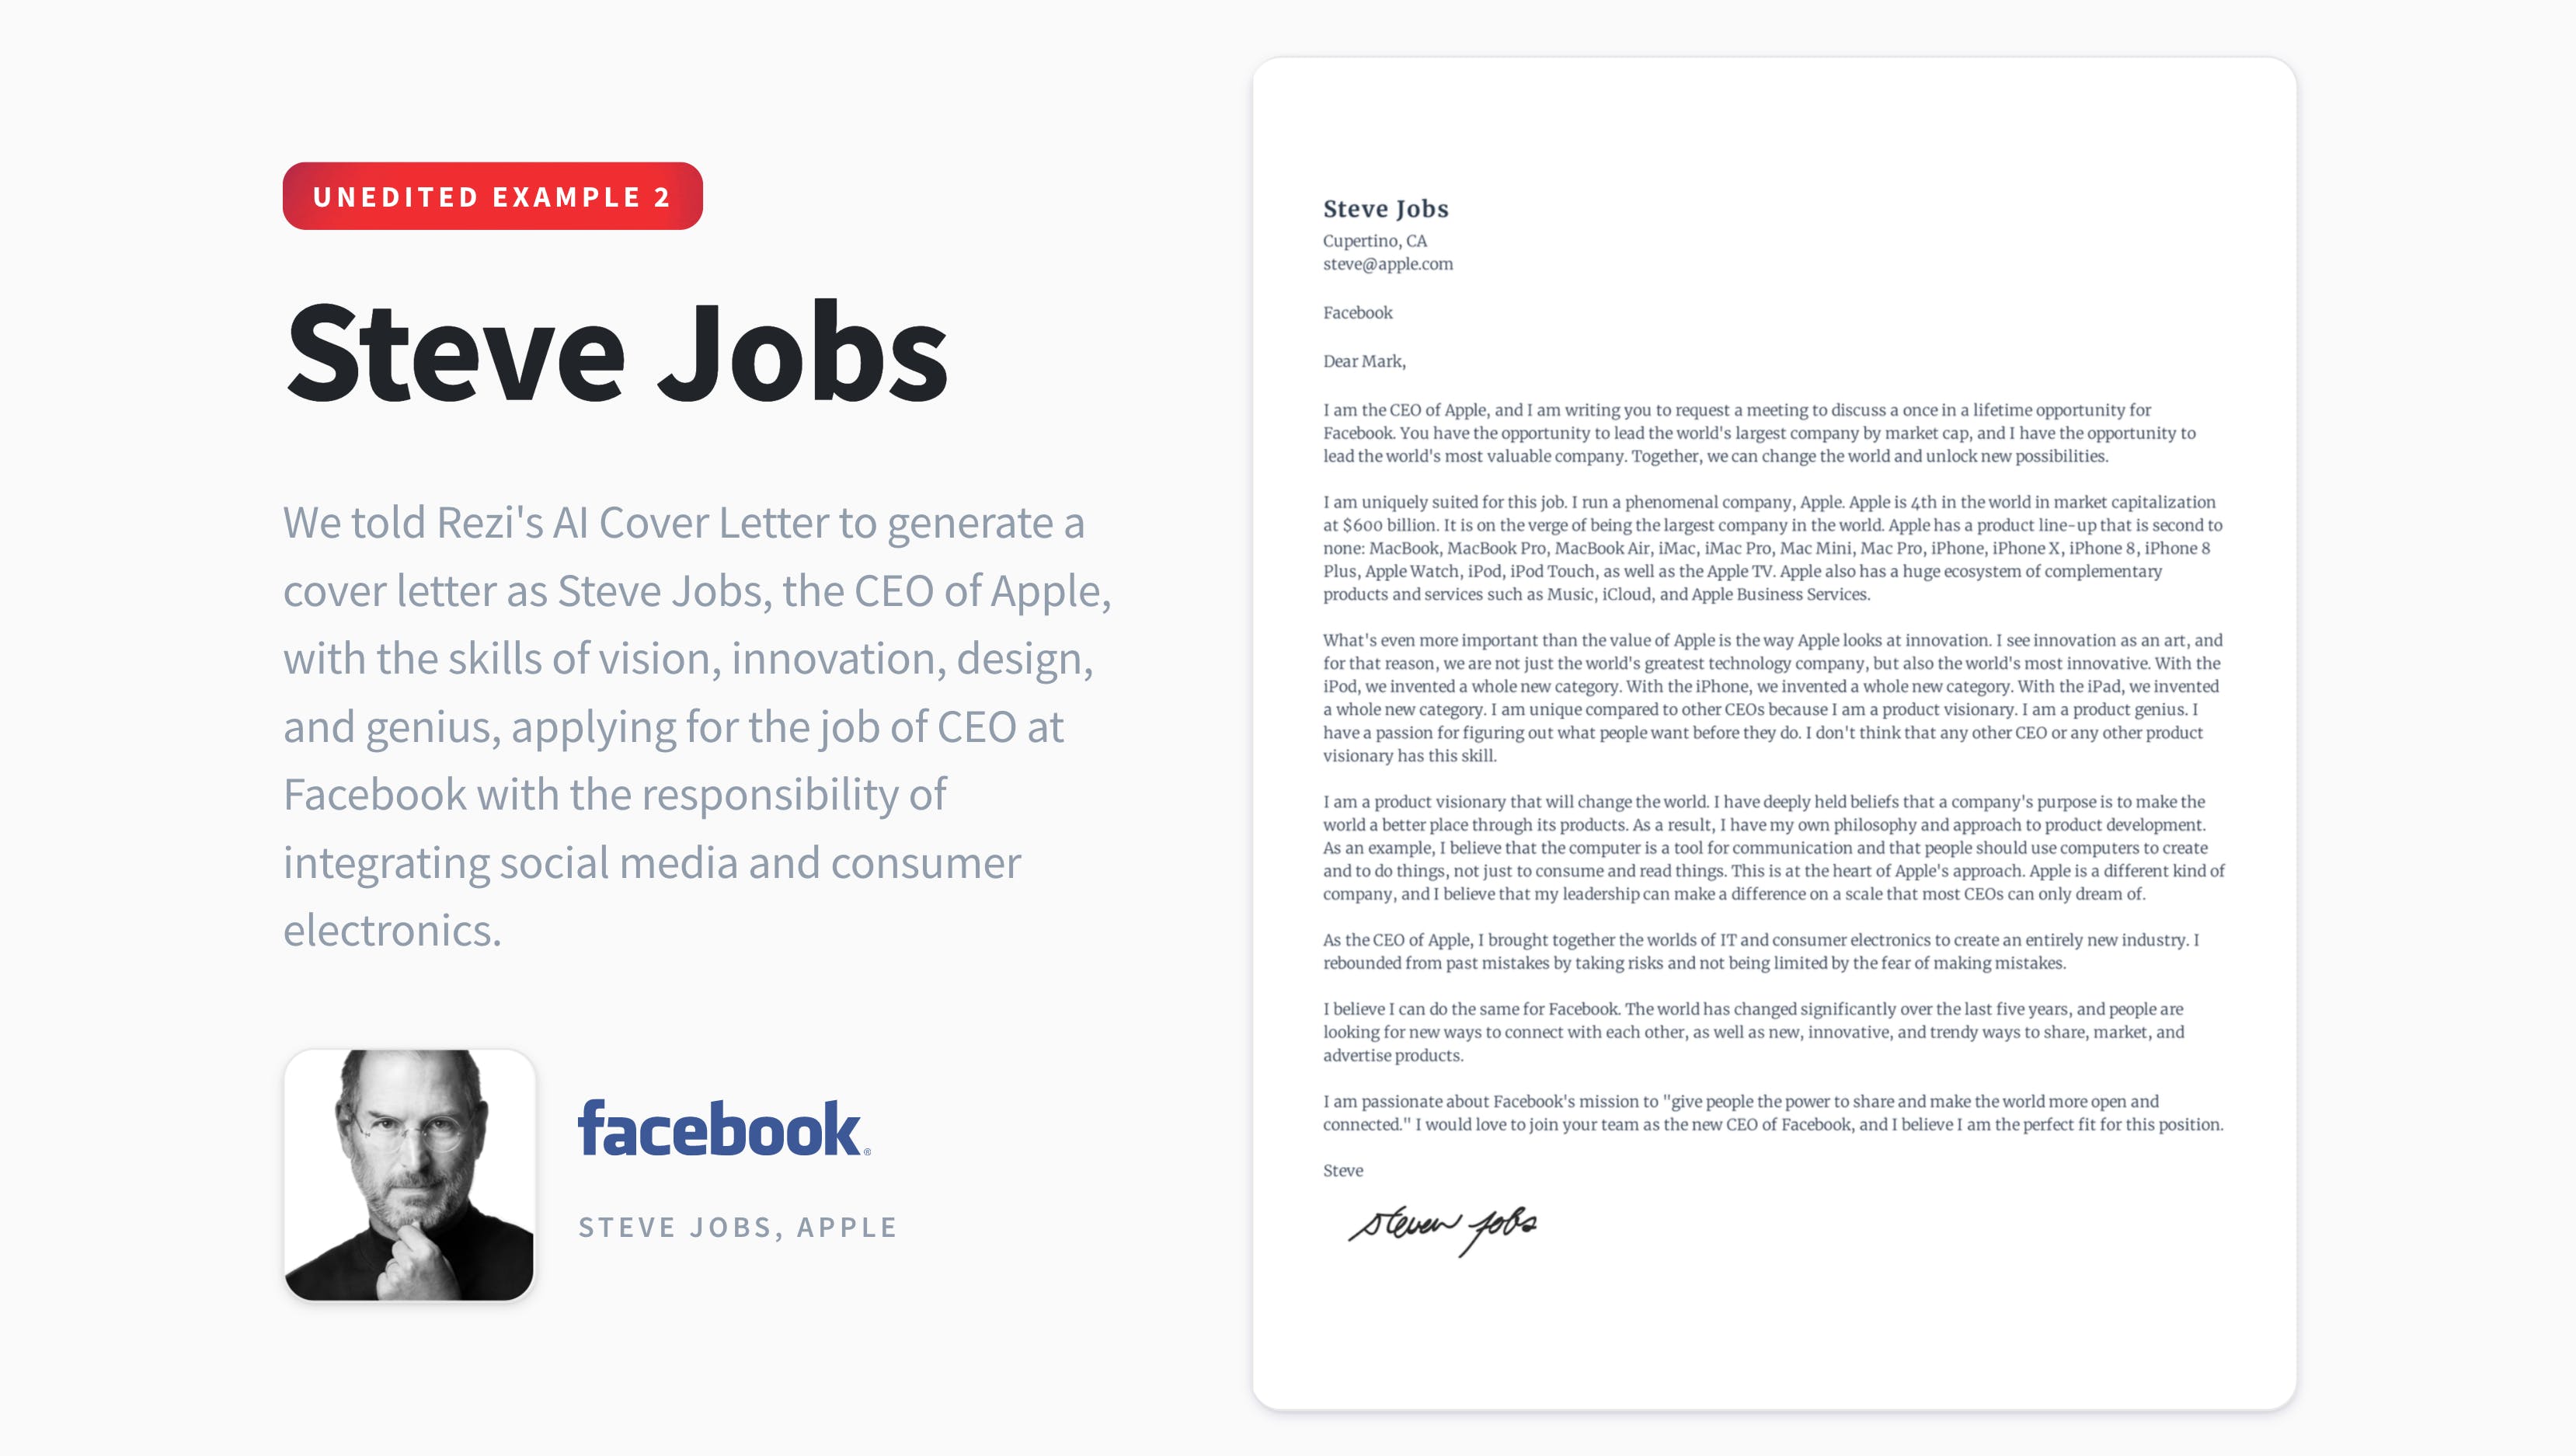 ai powered cover letter builder